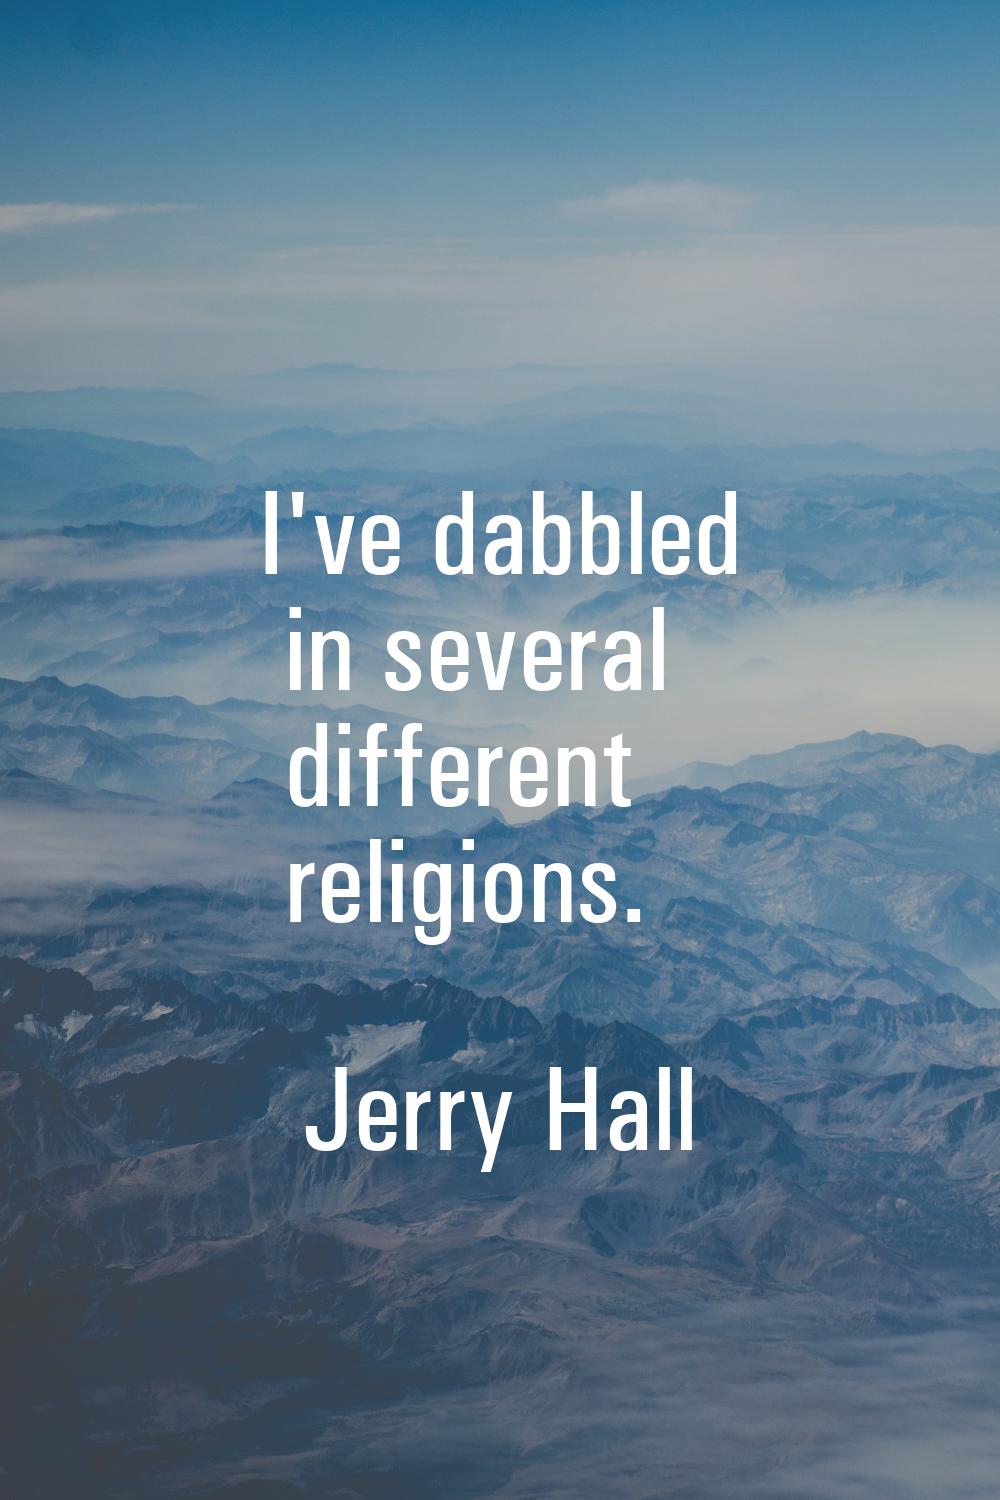 I've dabbled in several different religions.